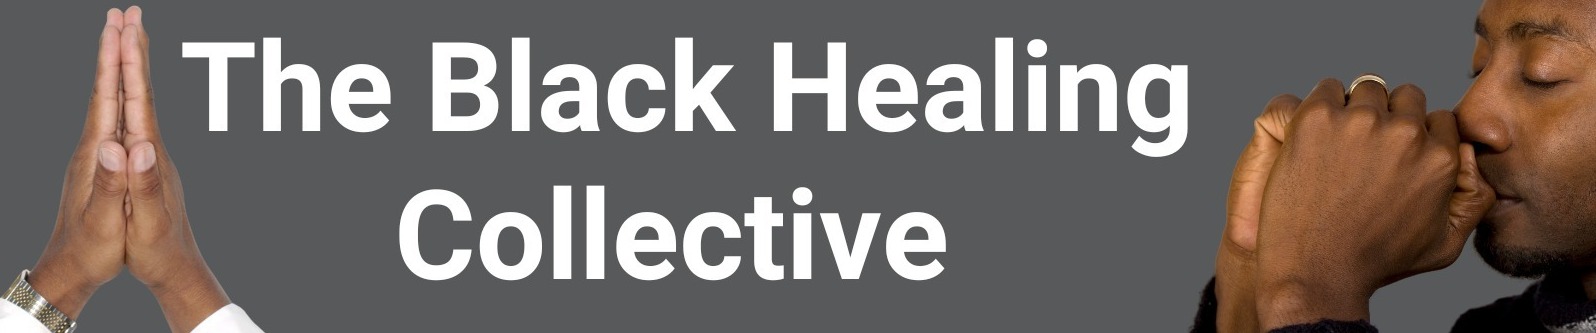 The Black Healing Collective Banner